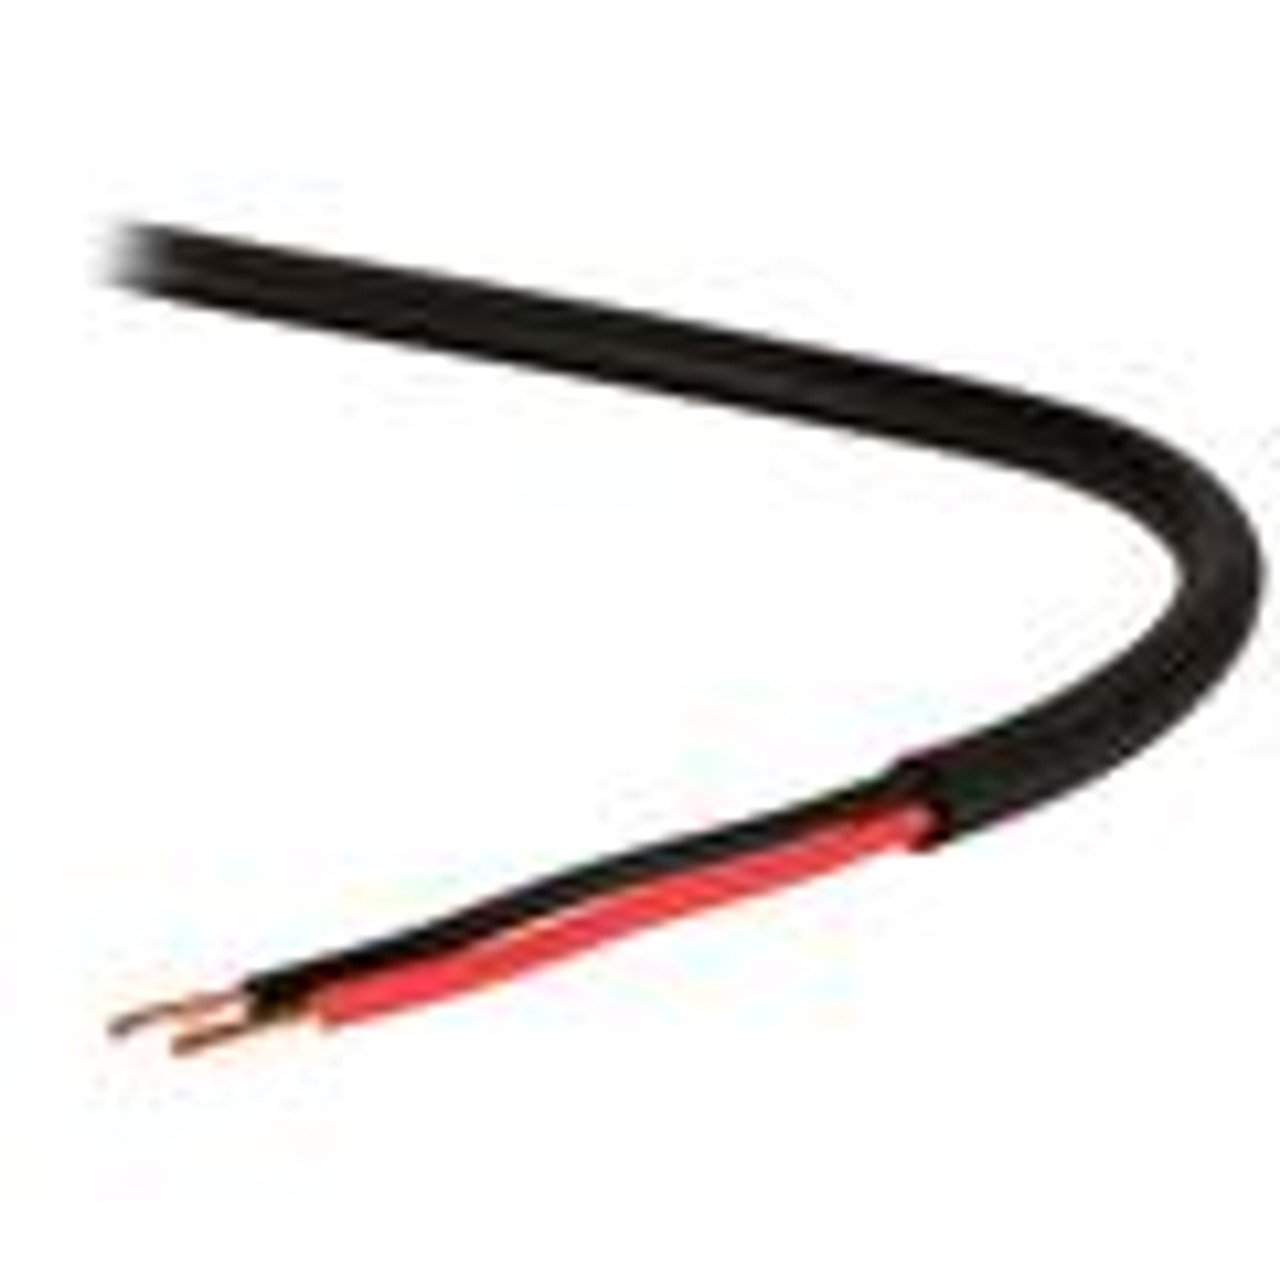 2 Cond 16 AWG Flexible wire